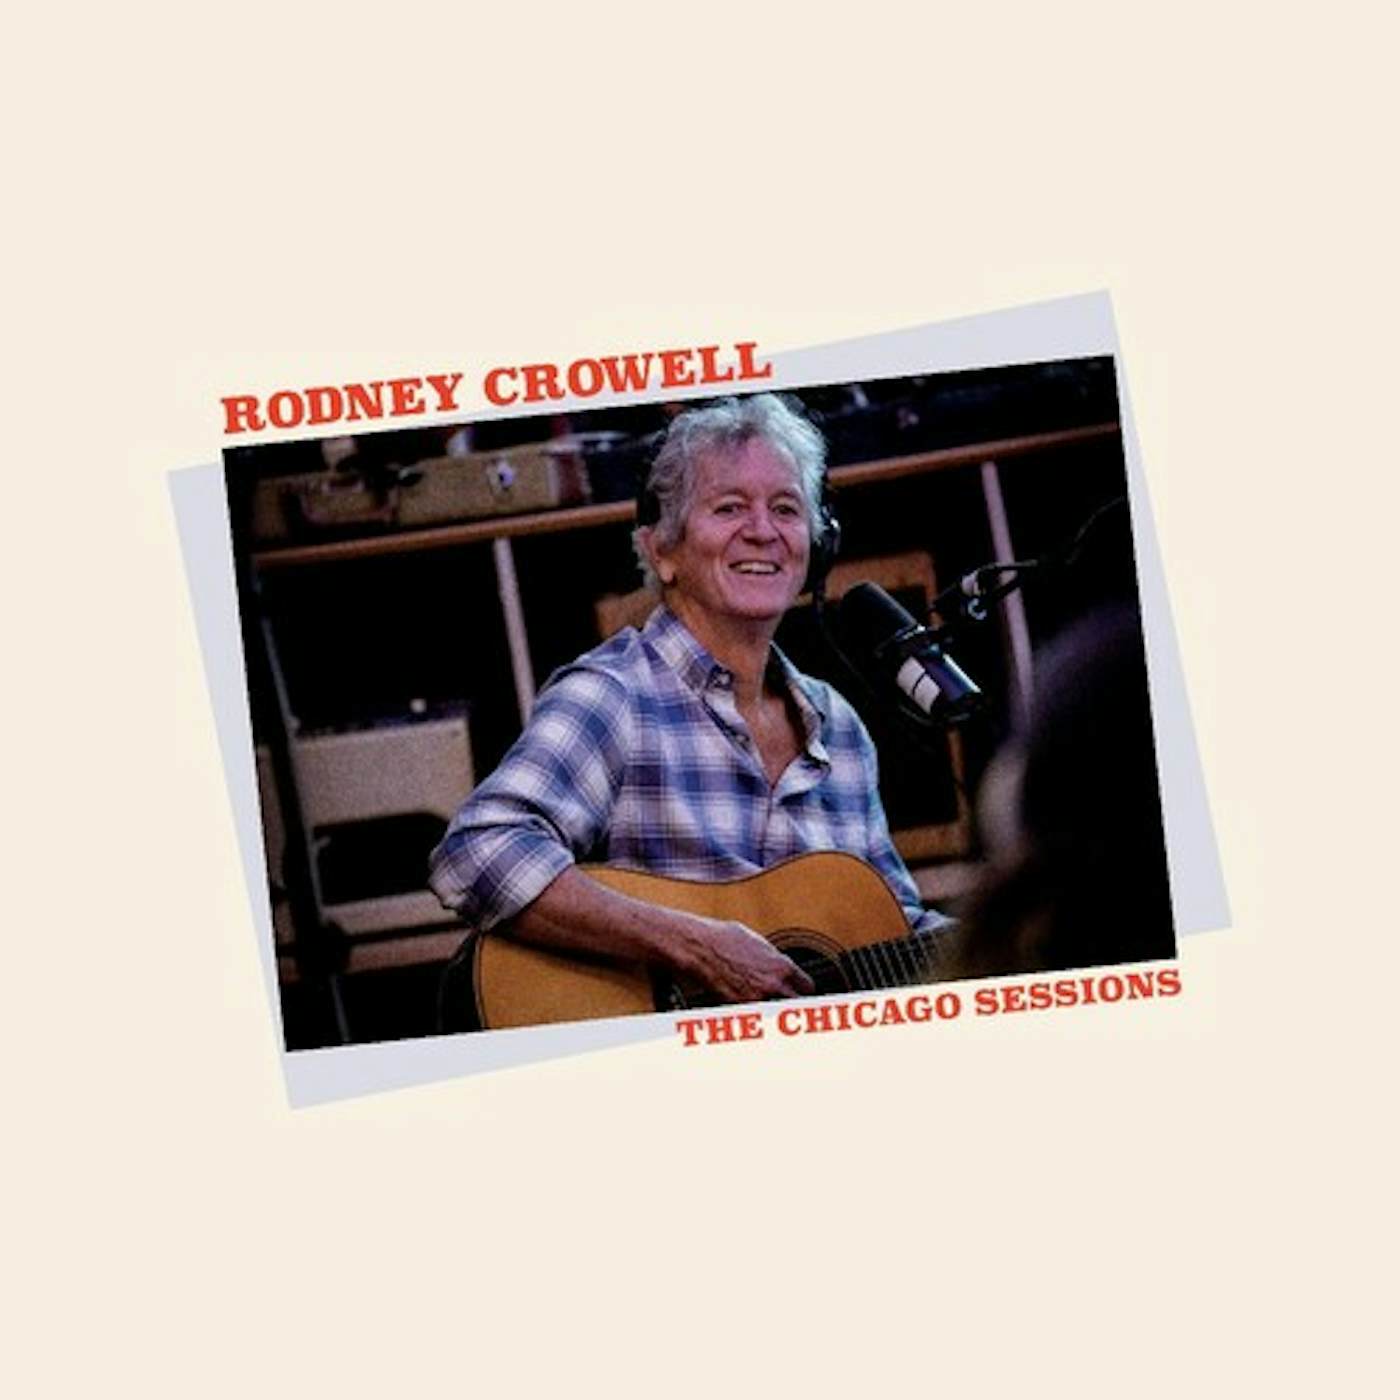 Rodney Crowell CHICAGO SESSIONS CD